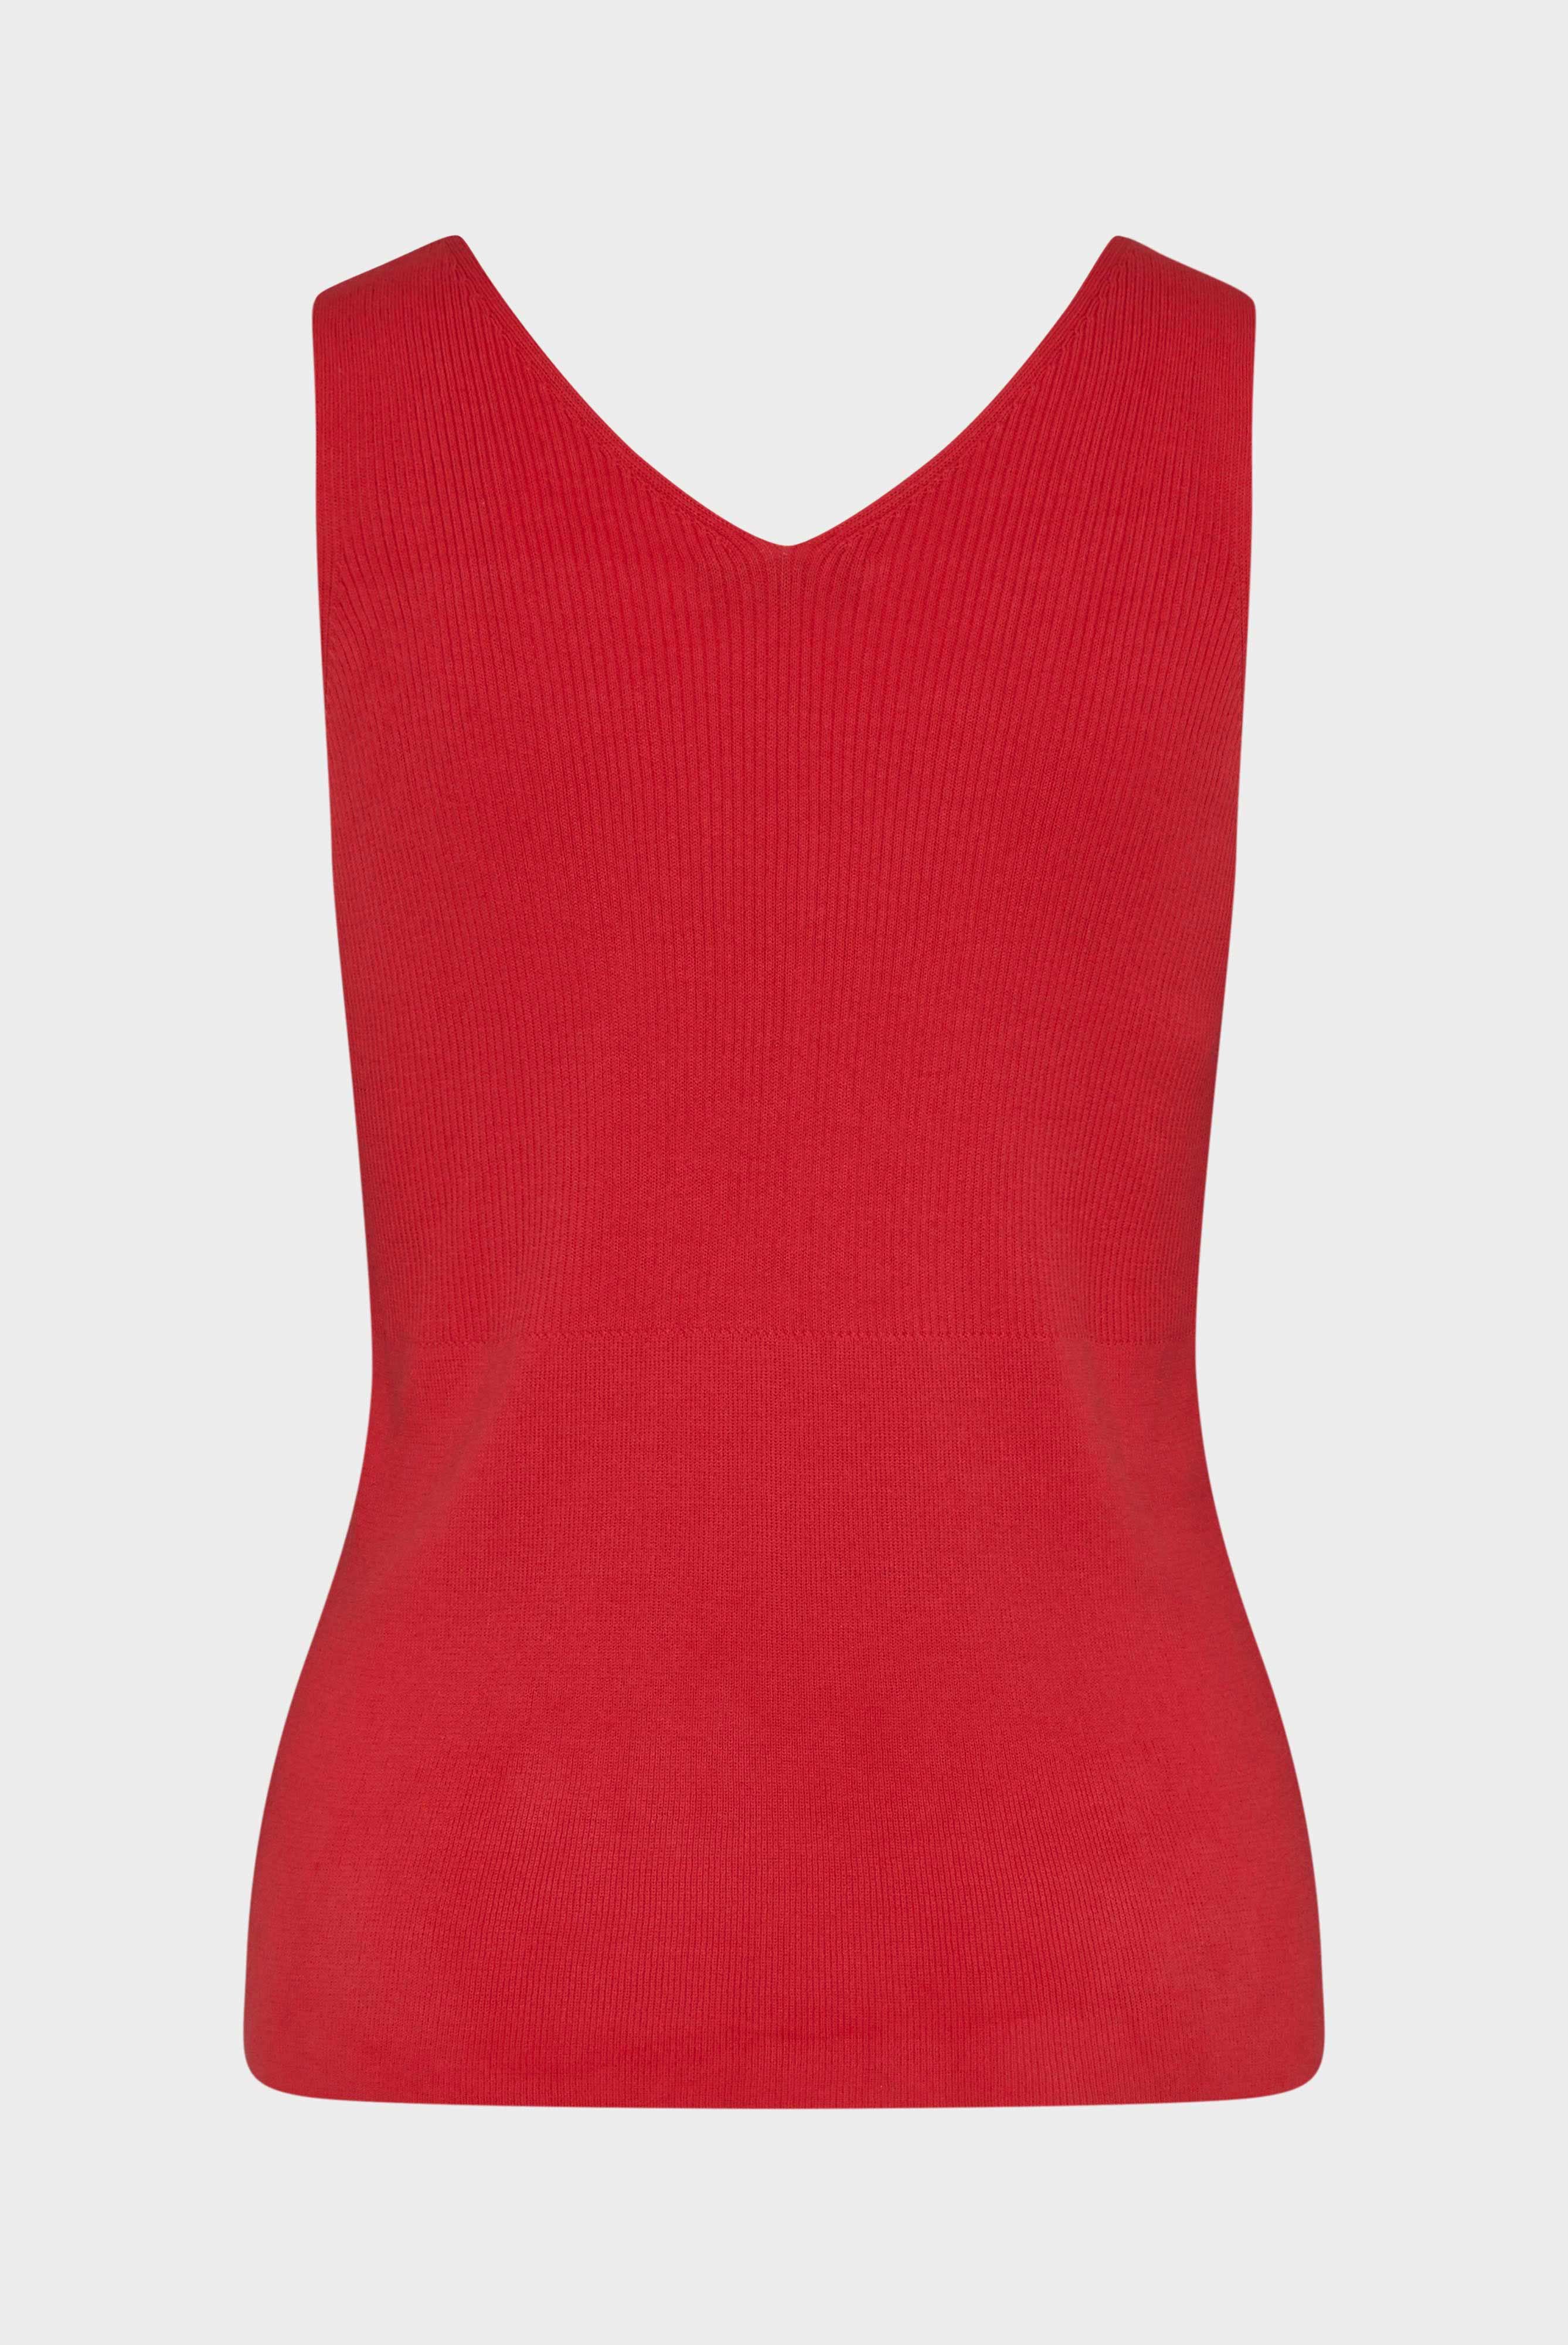 Tops & T-Shirts+Slim fit cotton tank top rot/rose+09.9966..S00192.540.L